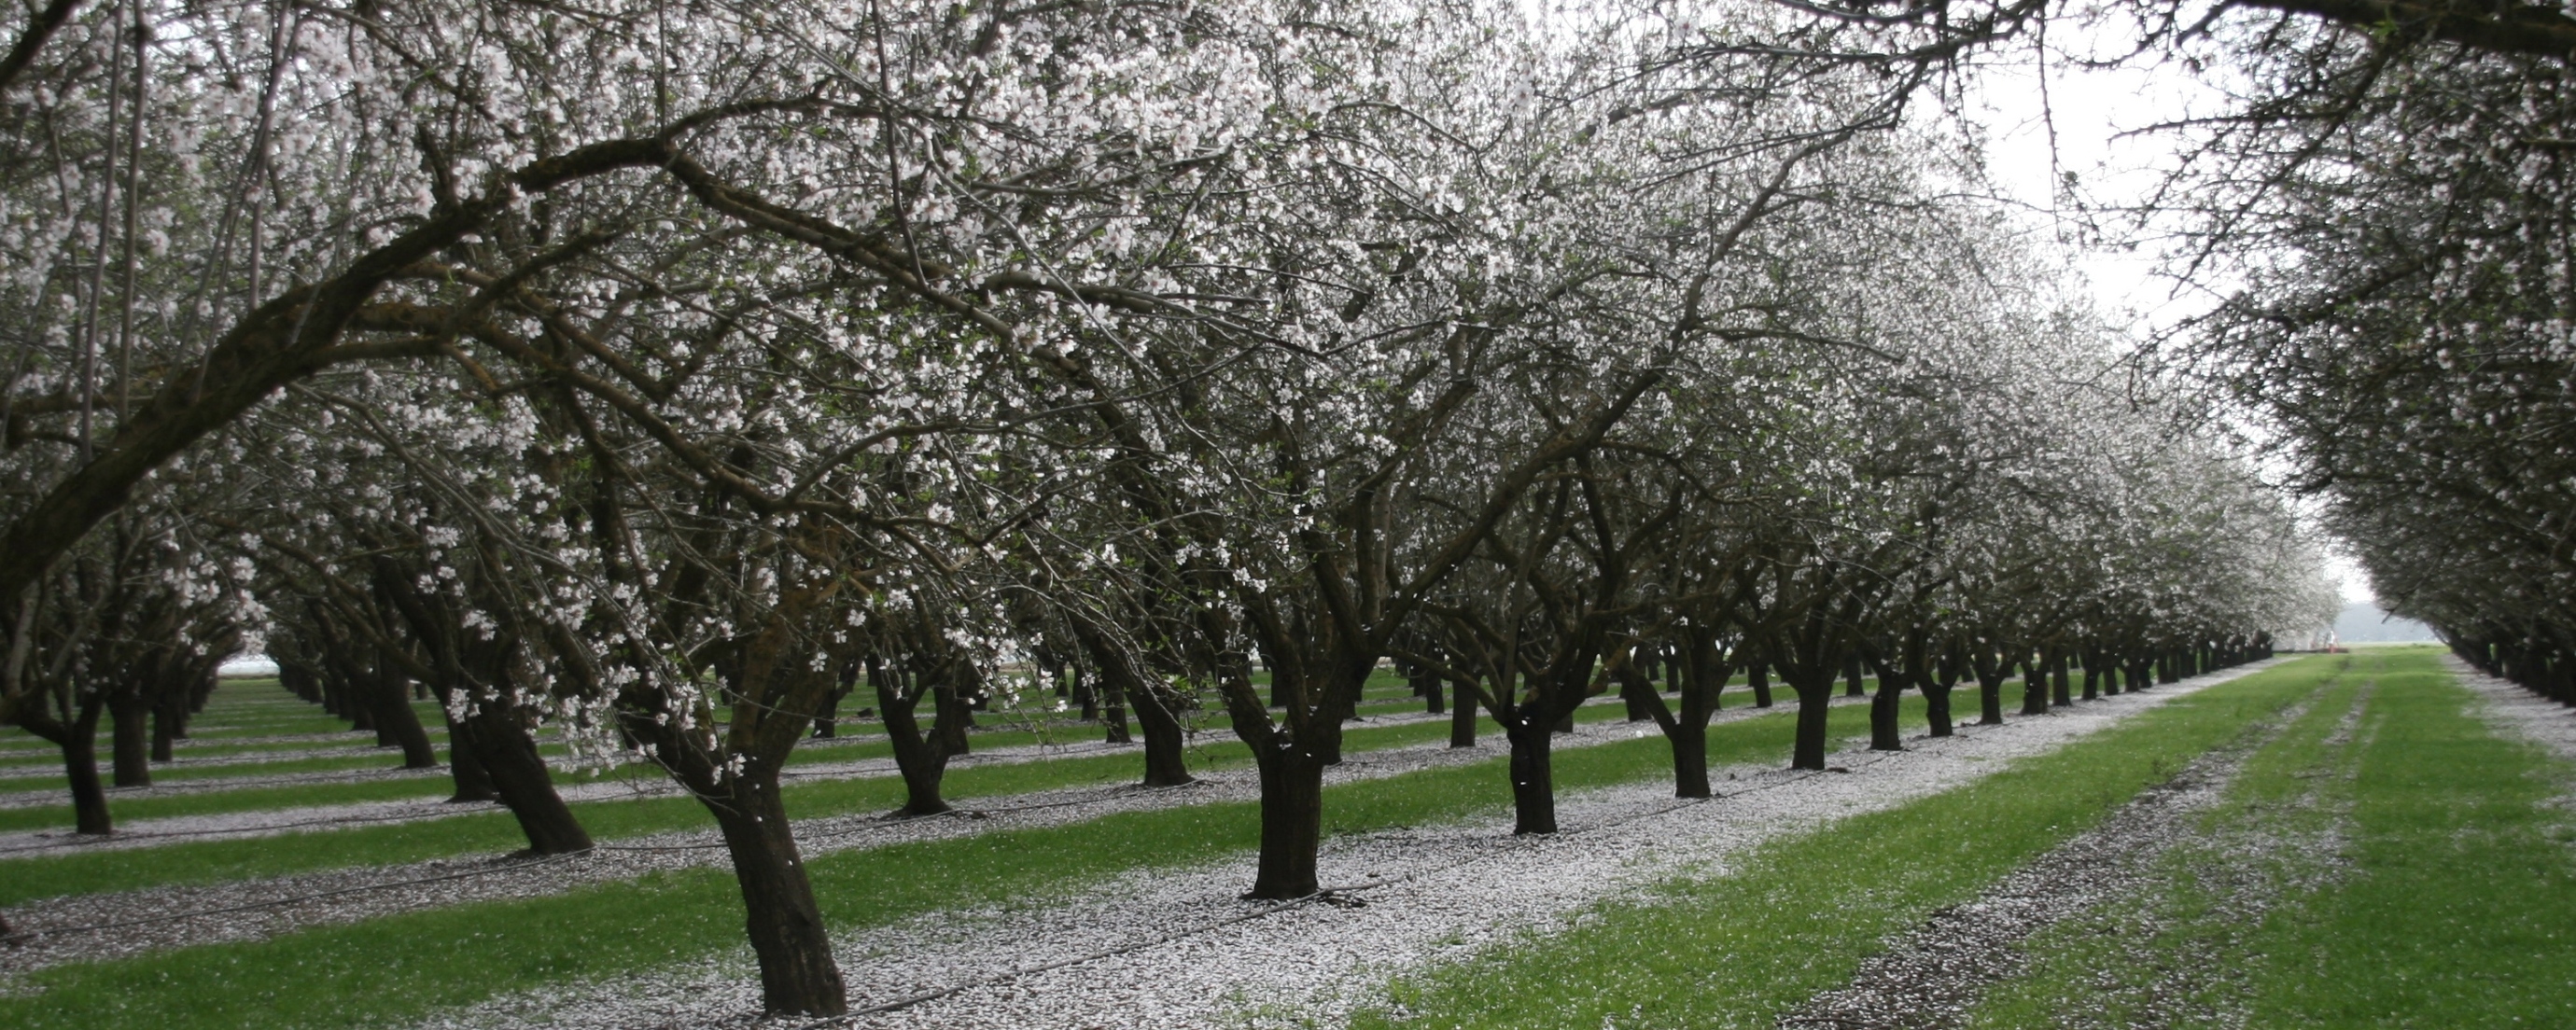 Family - owned almond farm